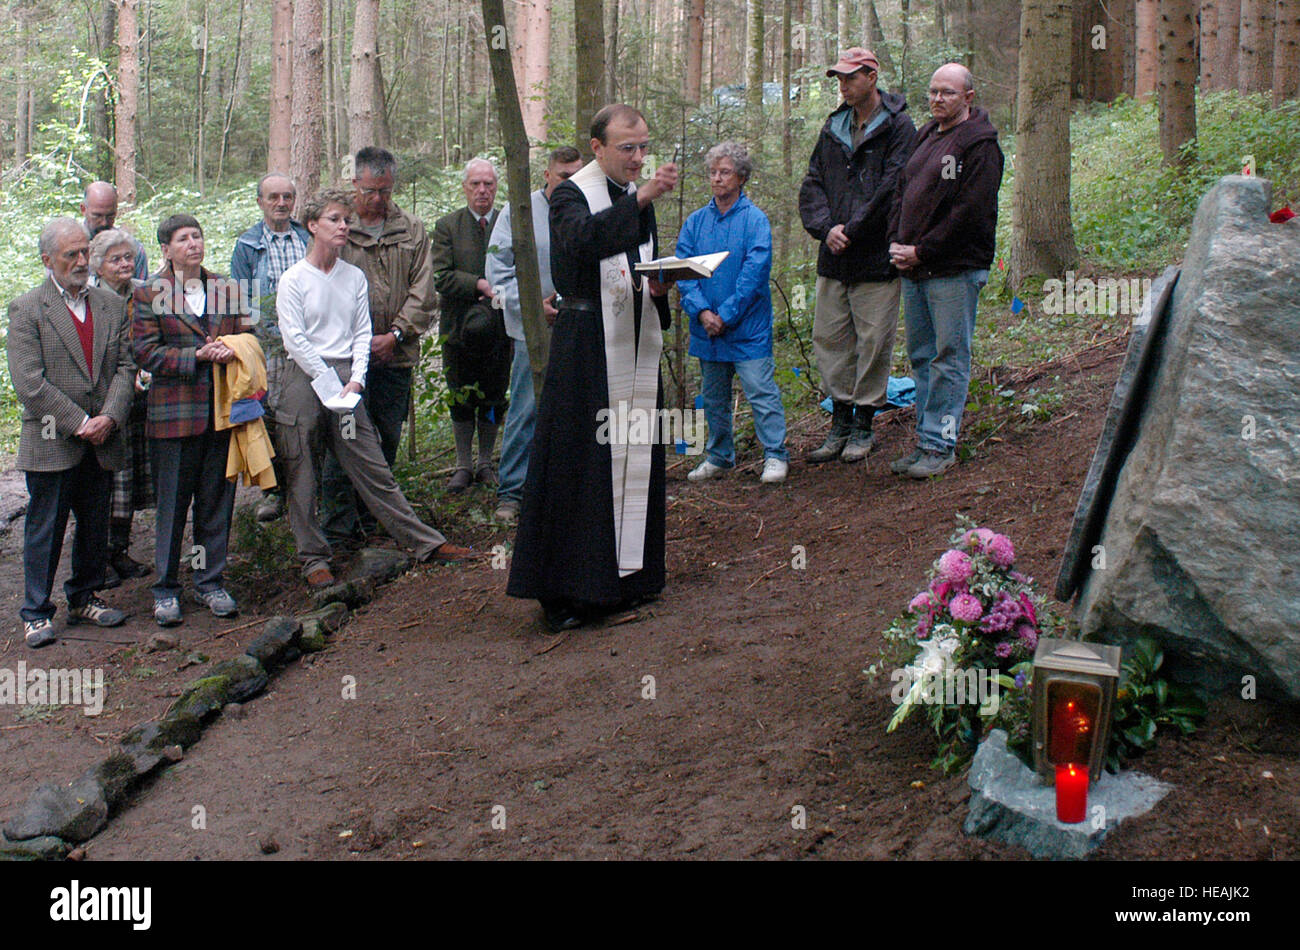 A priest from nearby Vostenhof, Austria, presides over an Aug. 27 memorial service for the members of a B-17 bomber that crashed in the area May 10, 1944. The service was attended by family, friends and members of the Joint POW/MIA Accounting Command. An 18-member JPAC team, including a forensic anthropologist, explosive ordnance disposal technician and field medic, from Hickam Air Force Base, Hawaii, returned Saturday after 45 days in Austria attempting to recover the remains of 1st Lt. Stanley Dwyer and gunner Sgt. John Boros who were lost in the crash. The mission of JPAC is to achieve the  Stock Photo